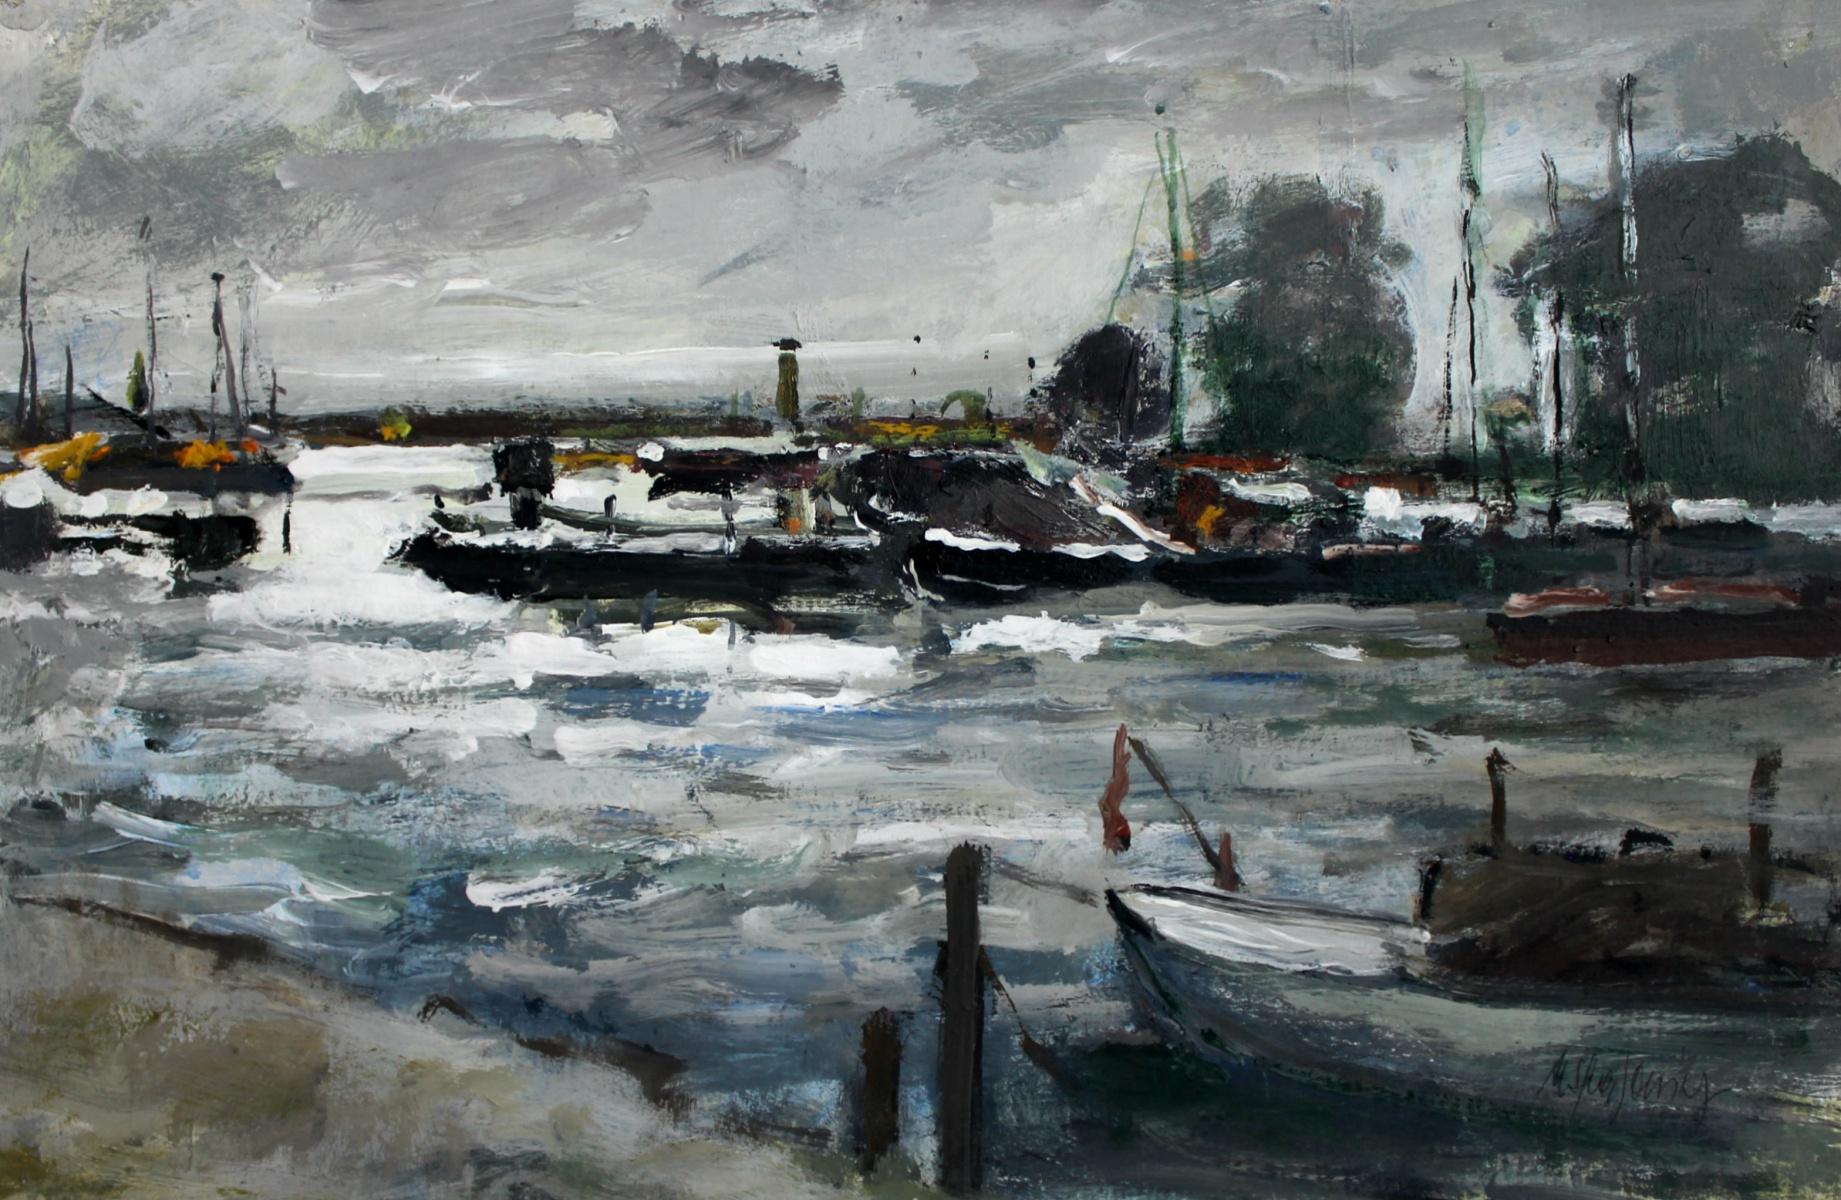 Boats - Oil painting, Figurative, Landscape, Muted colors, Impressionism